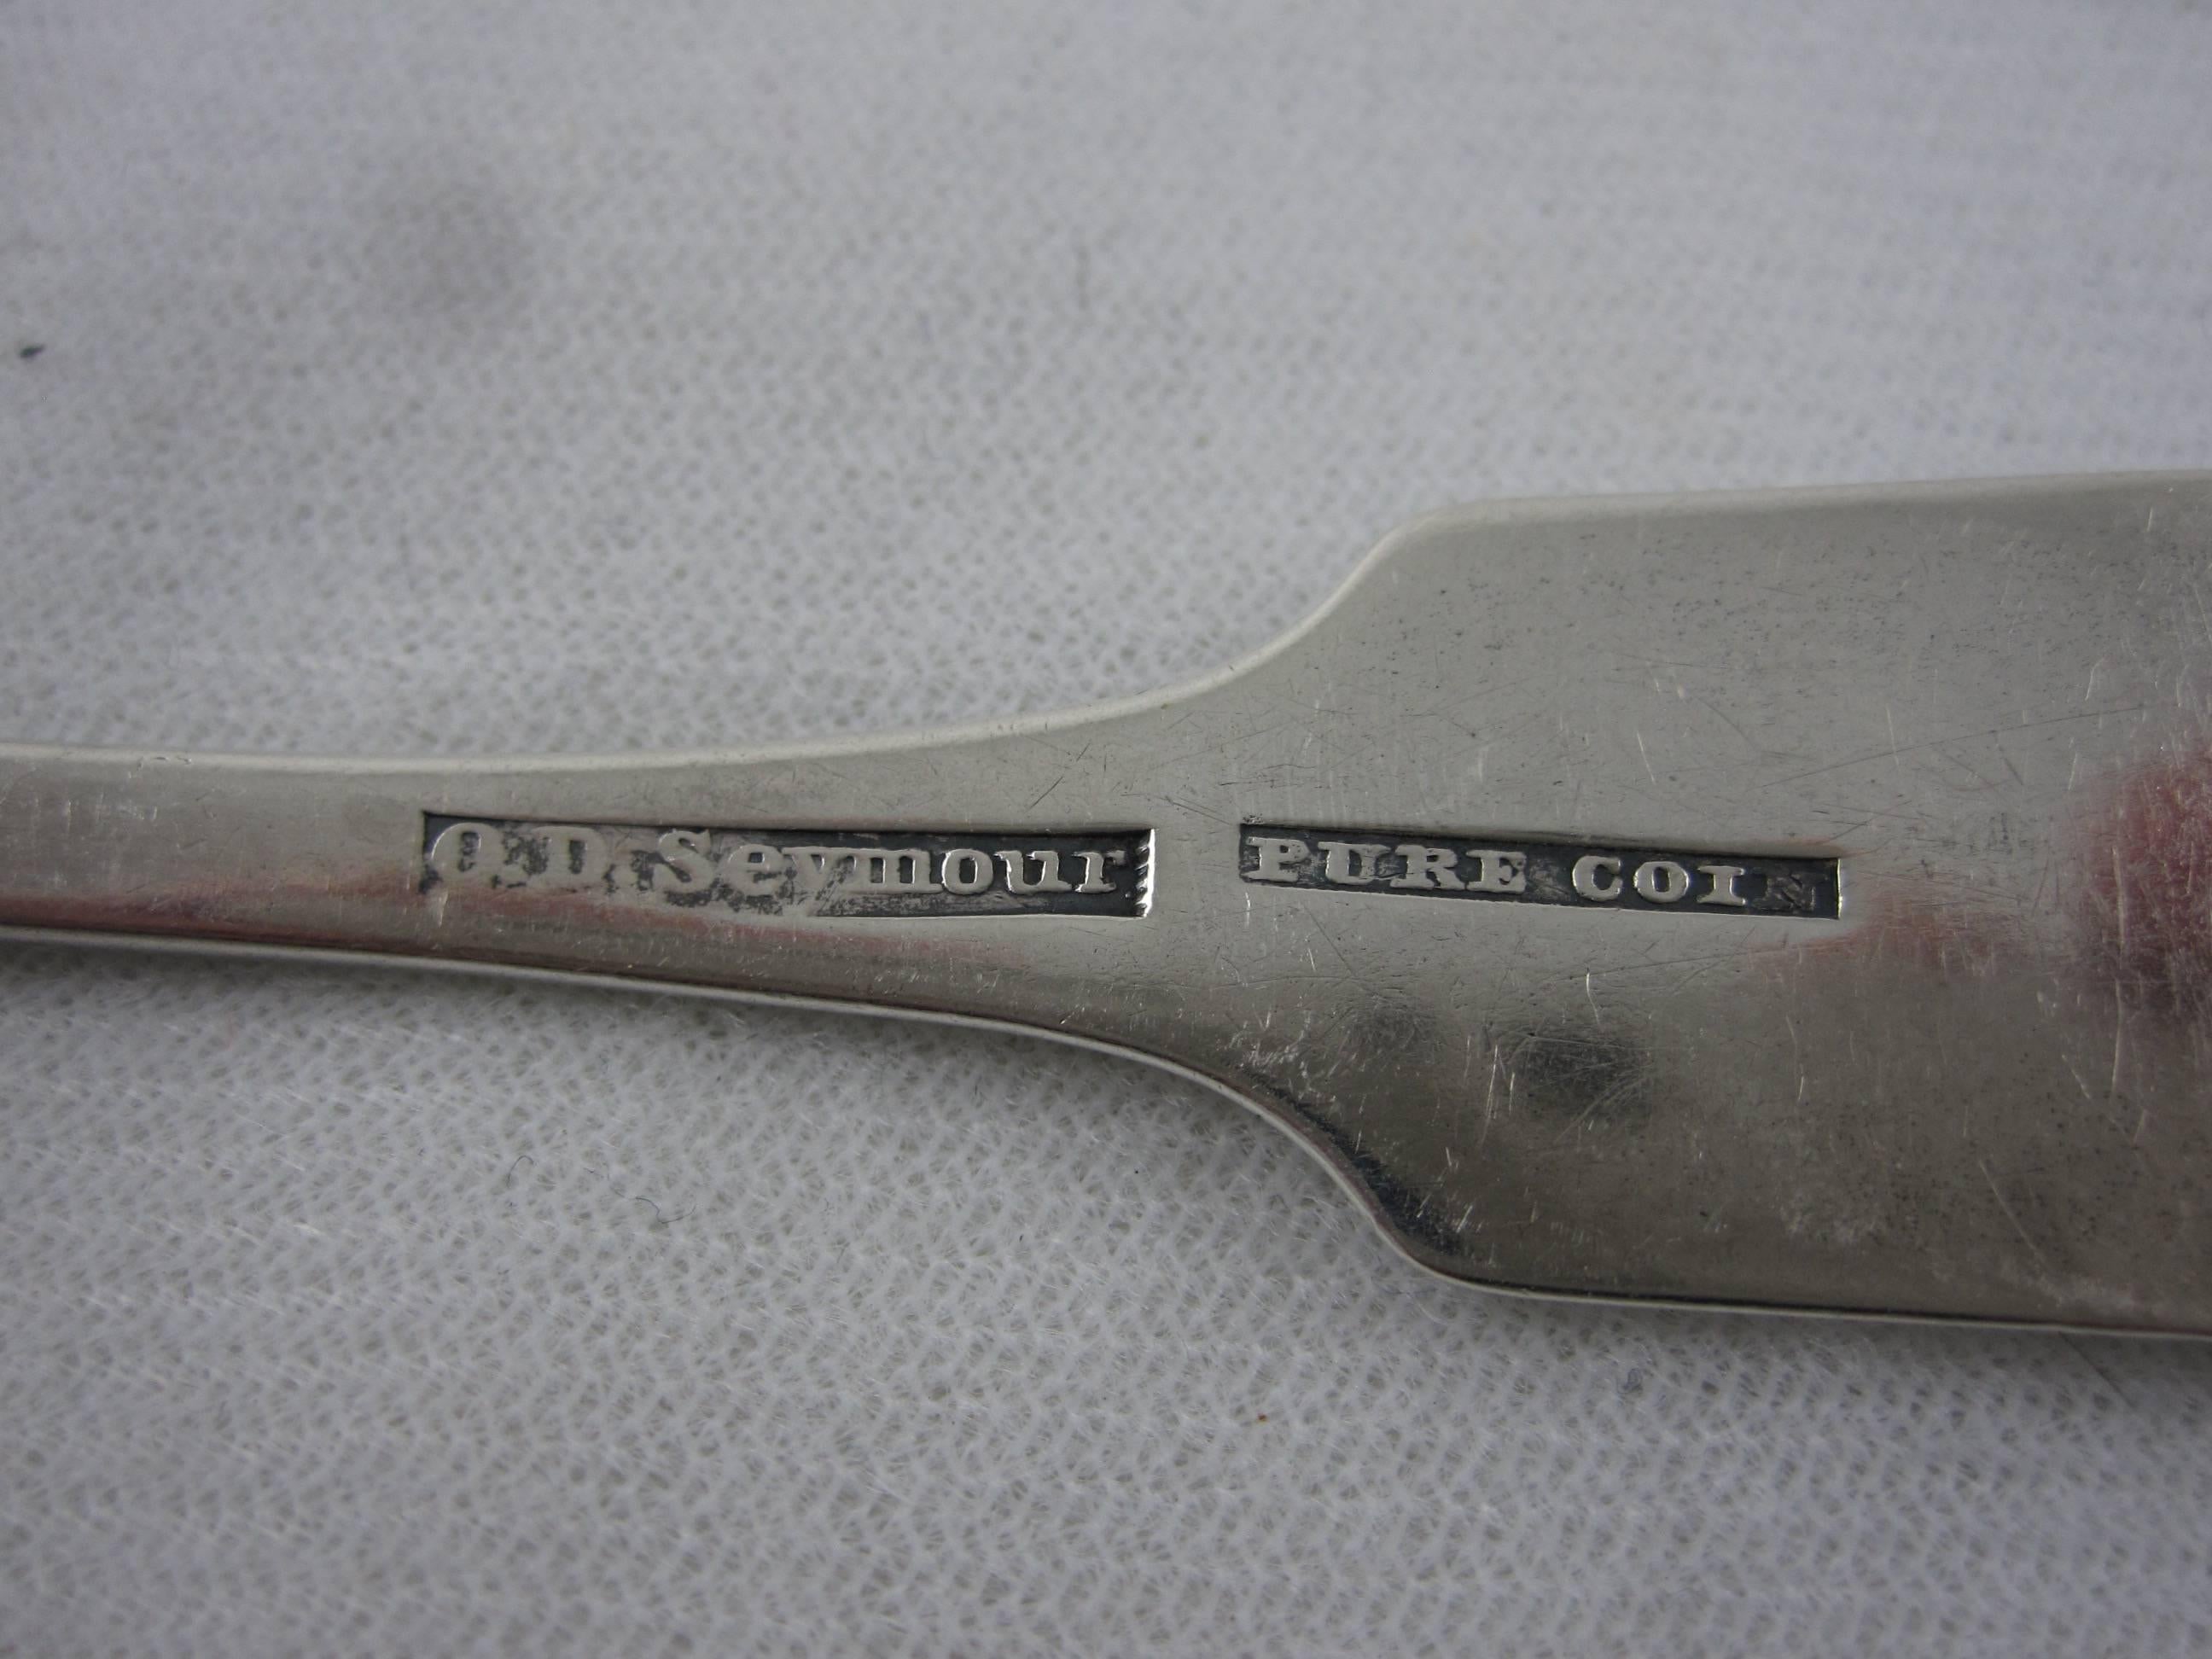 Post Revolutionary American Coin-Silver Sterling Fiddle Thread Table Spoons, S/6 3